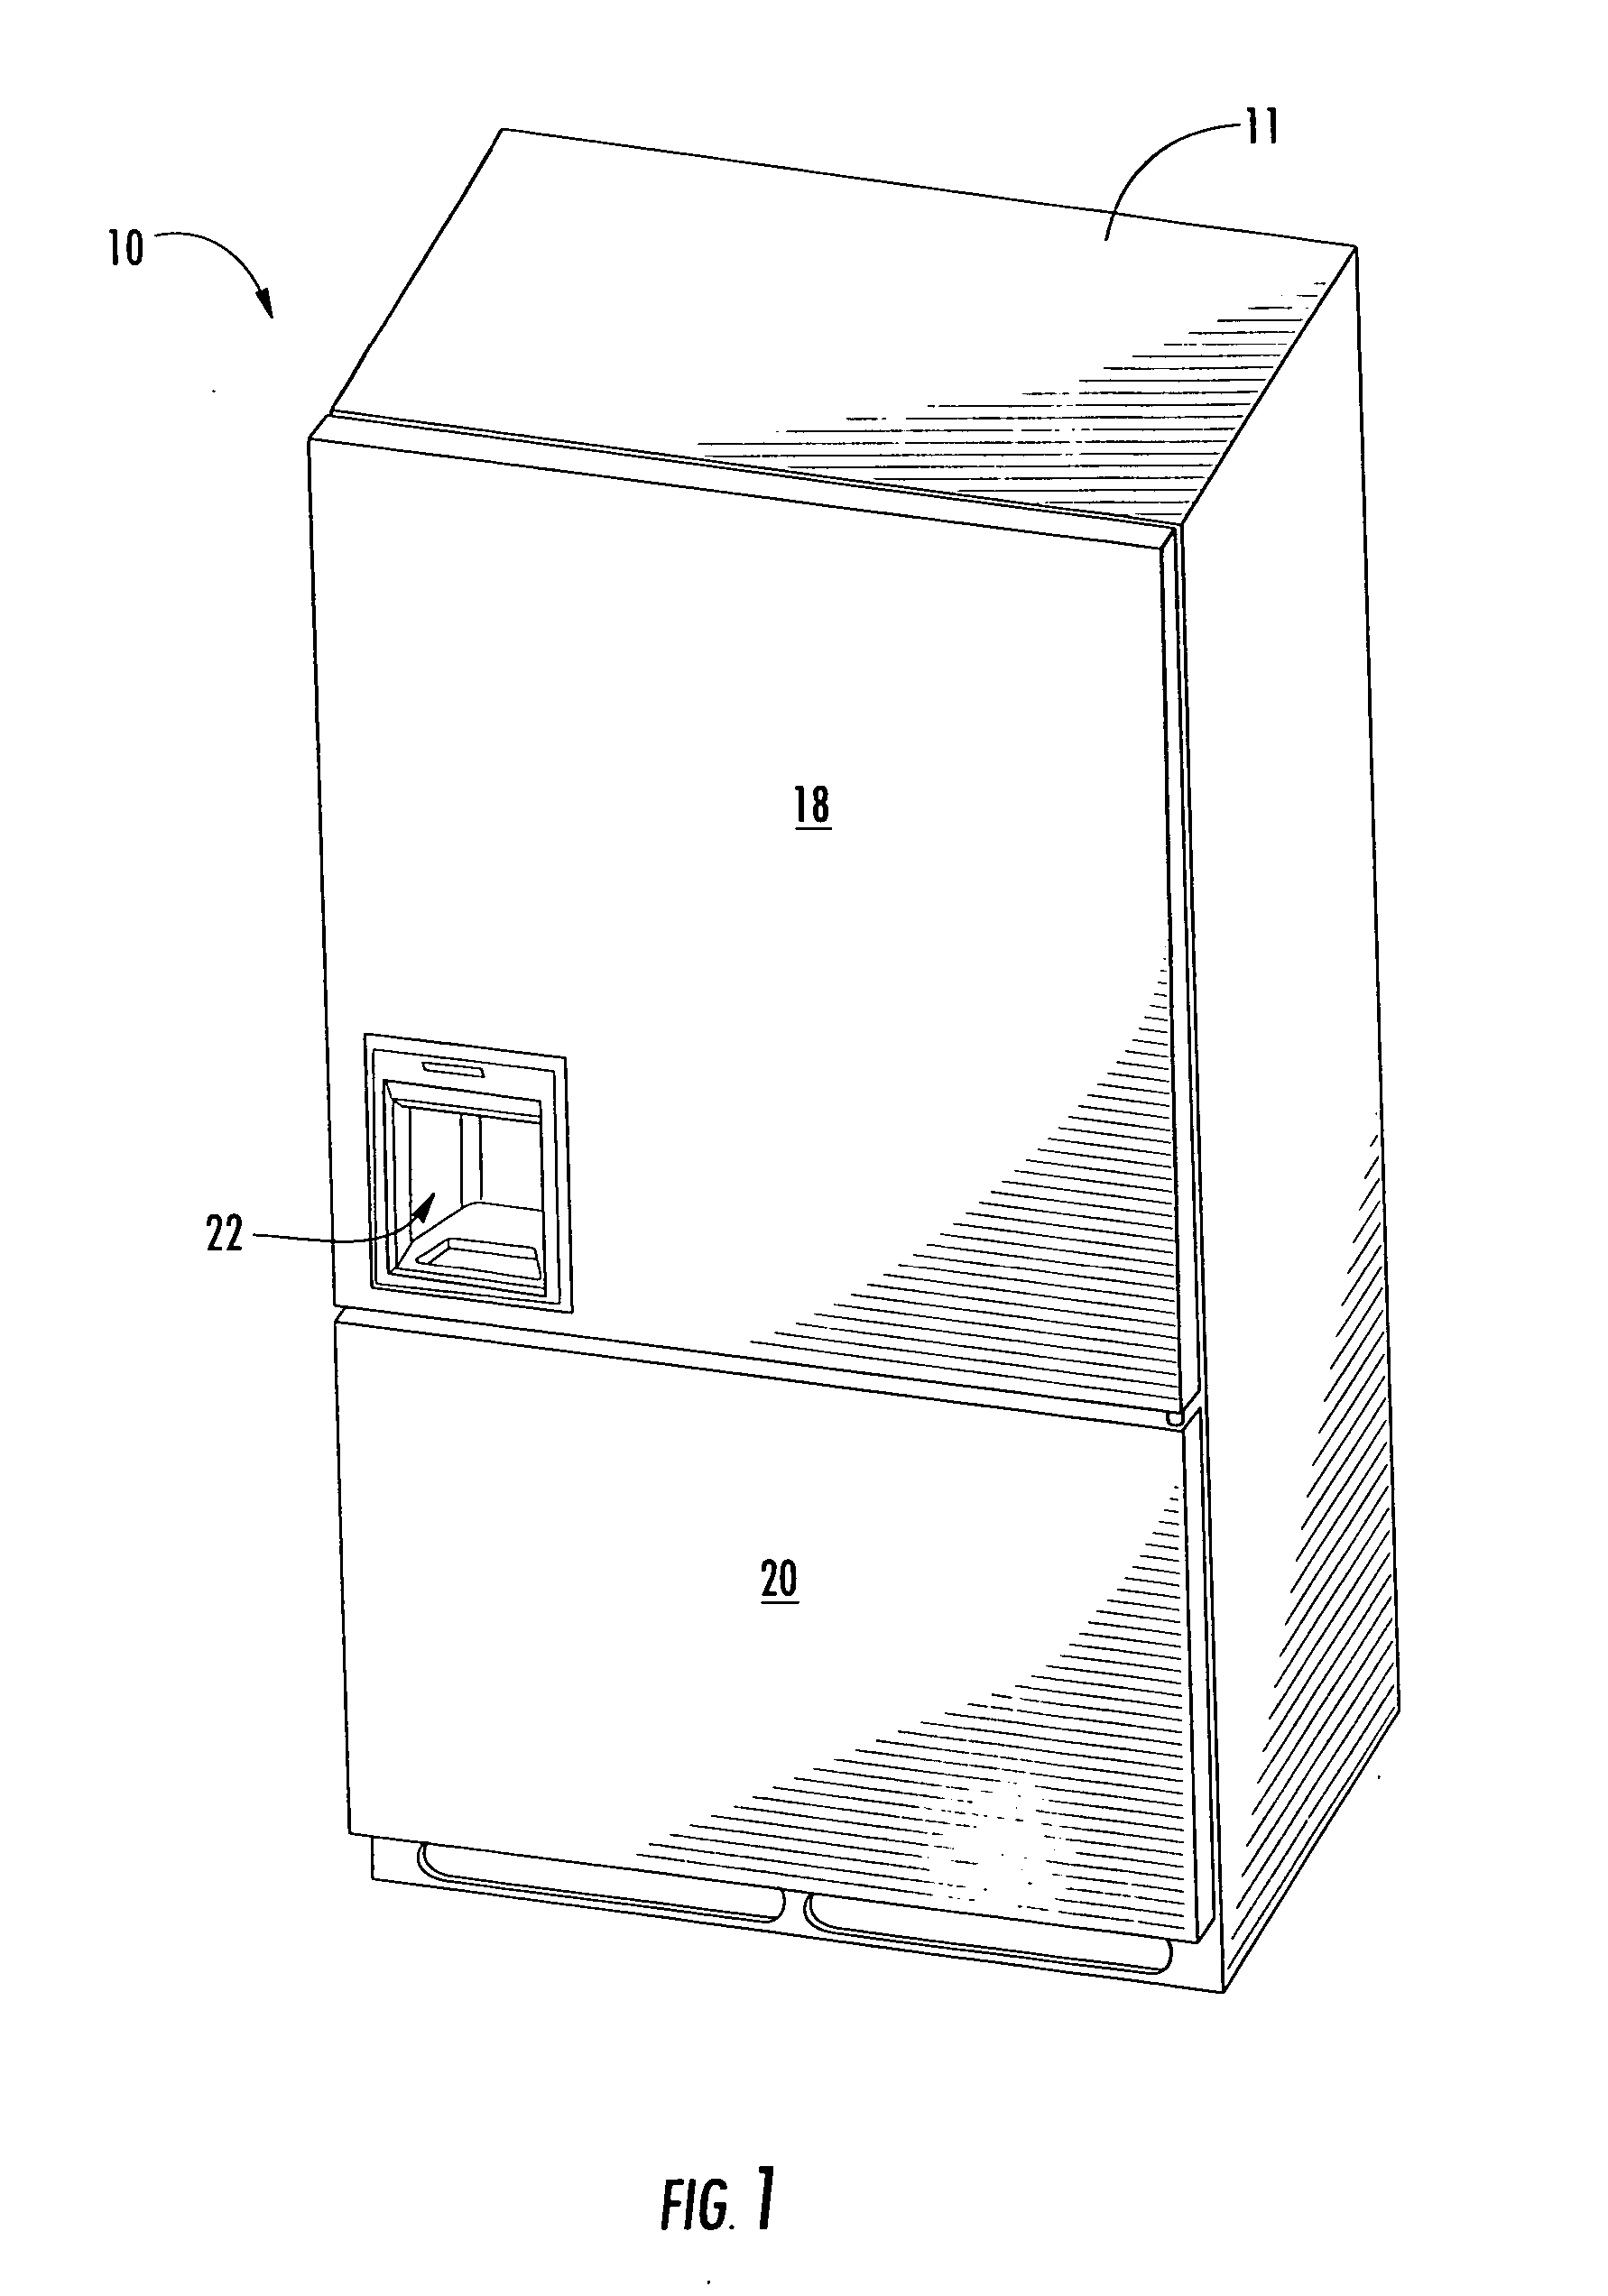 Apparatus and method for dispensing ice from a bottom mount refrigerator